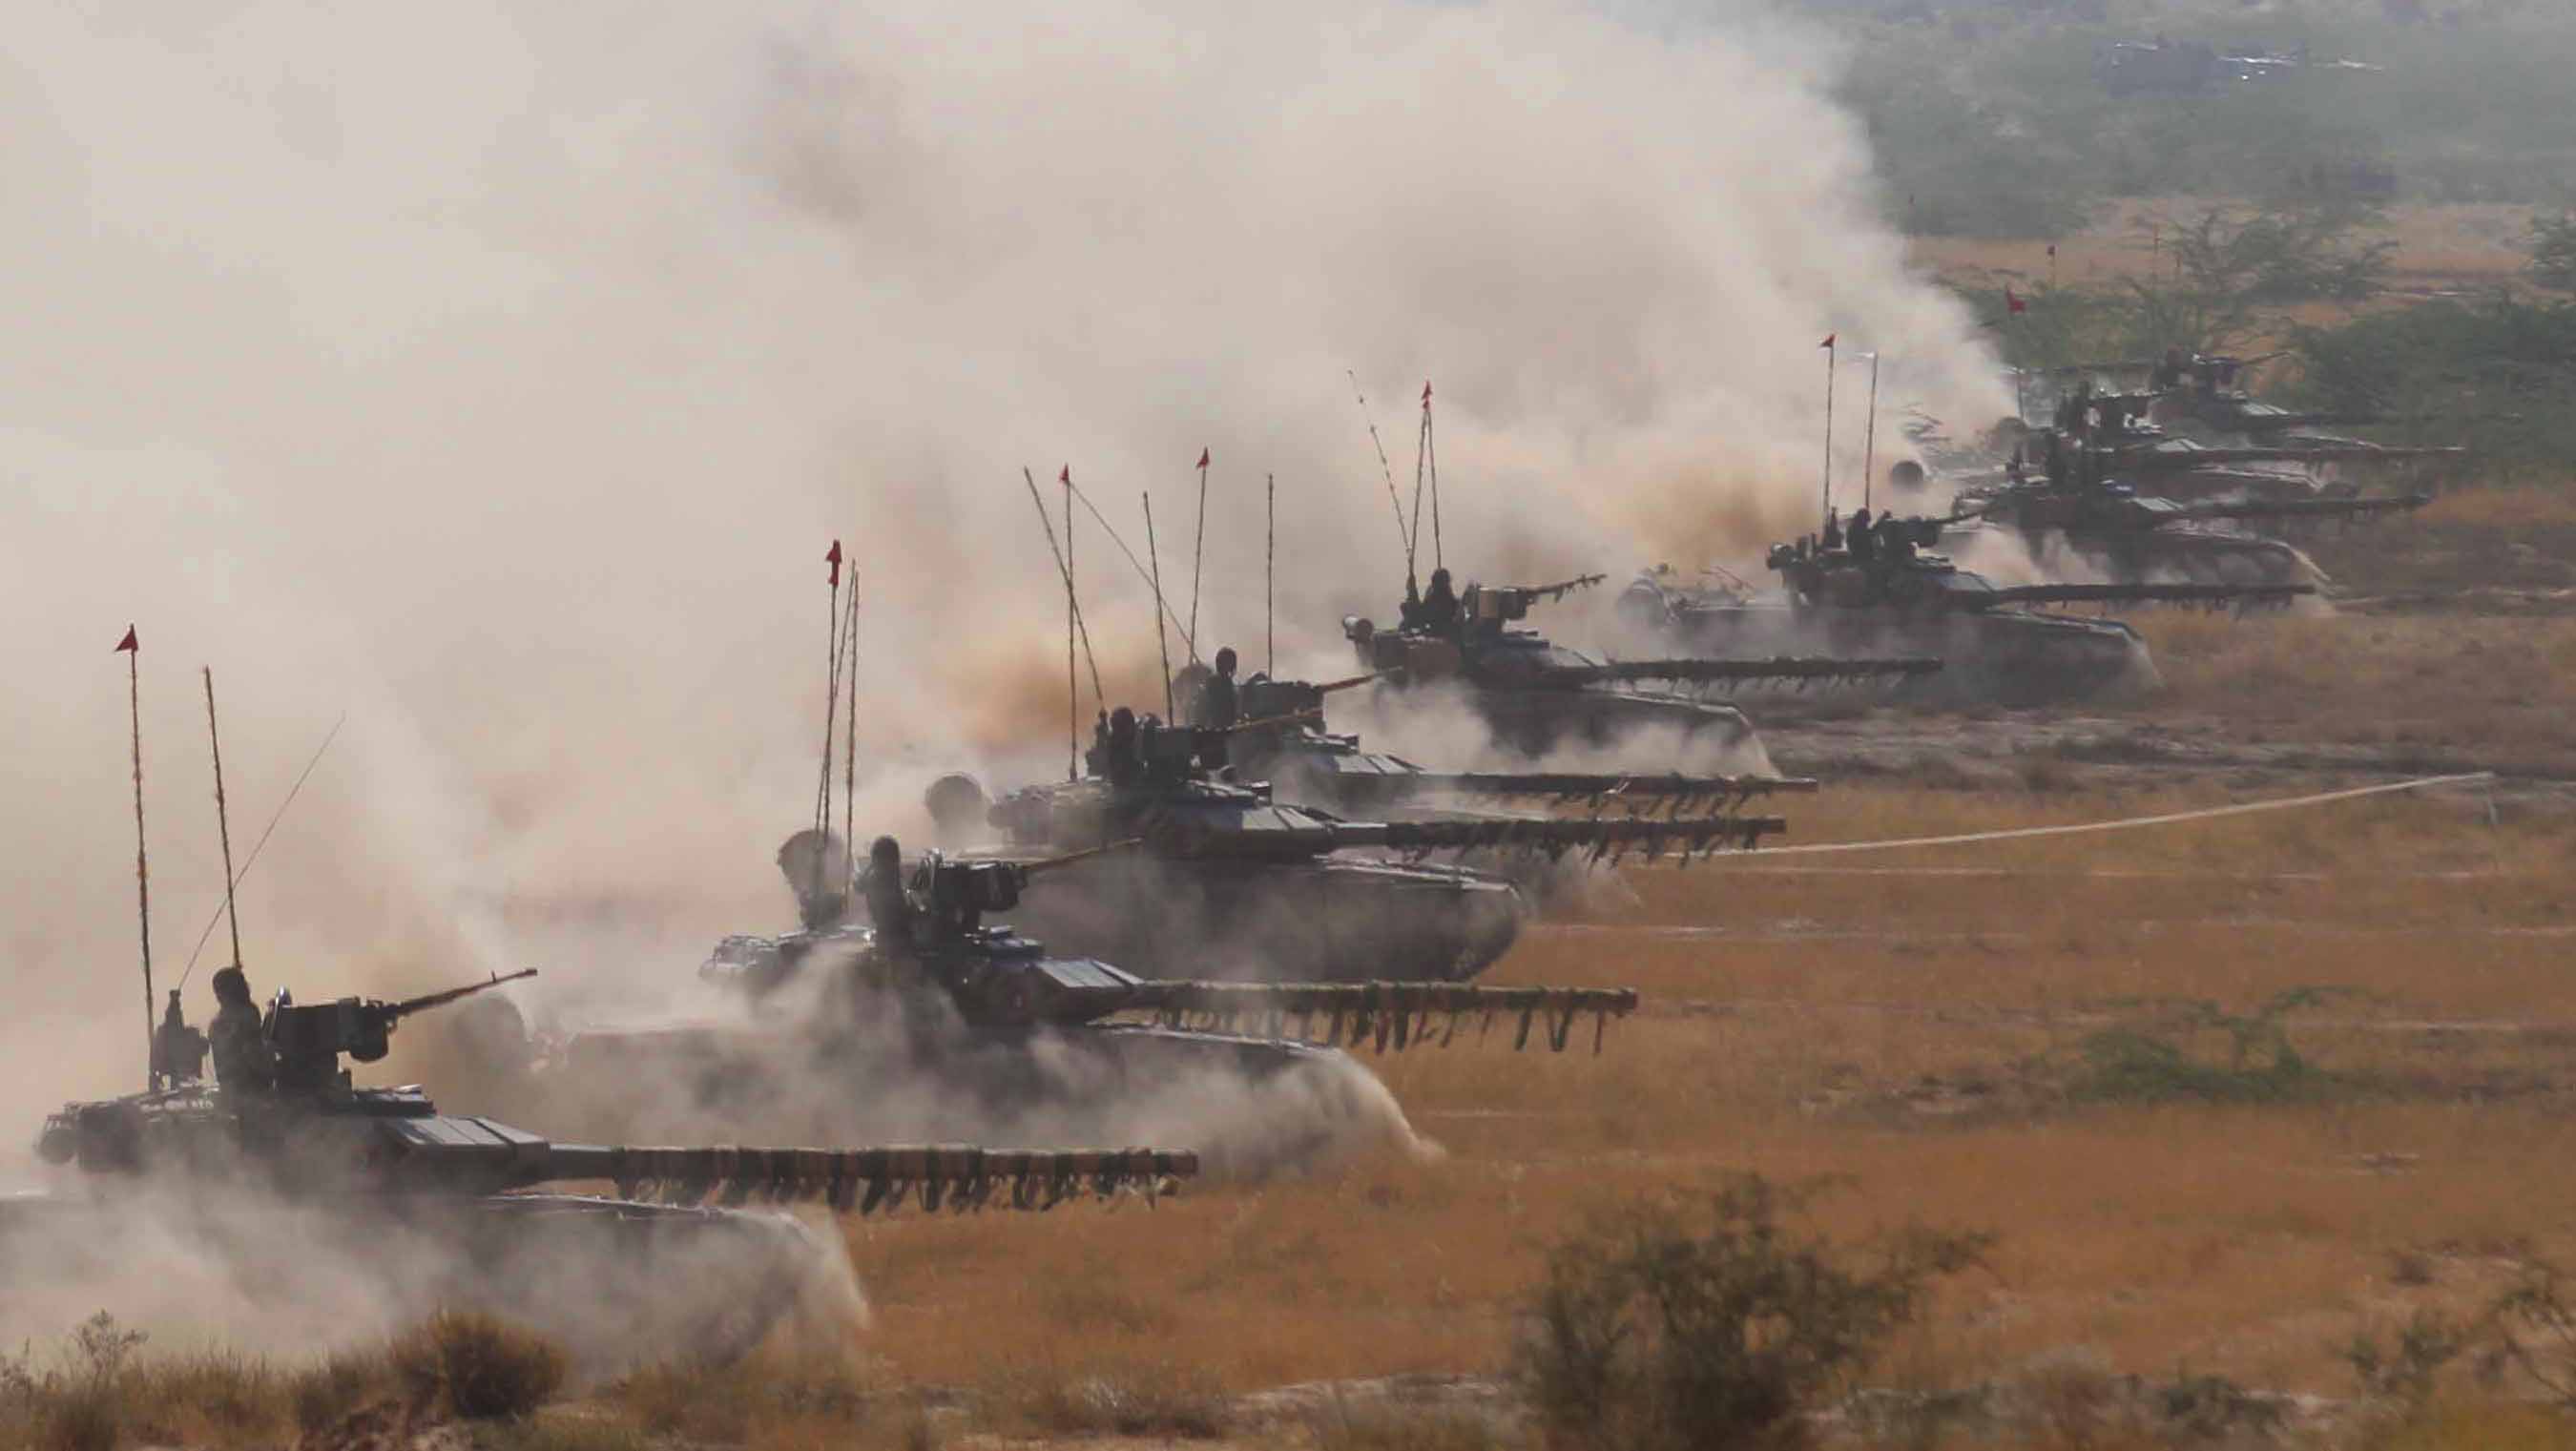 T-90 tanks participate in the Sudershan Shakt exercise in Rajasthan in 2011. Source: Getty Images